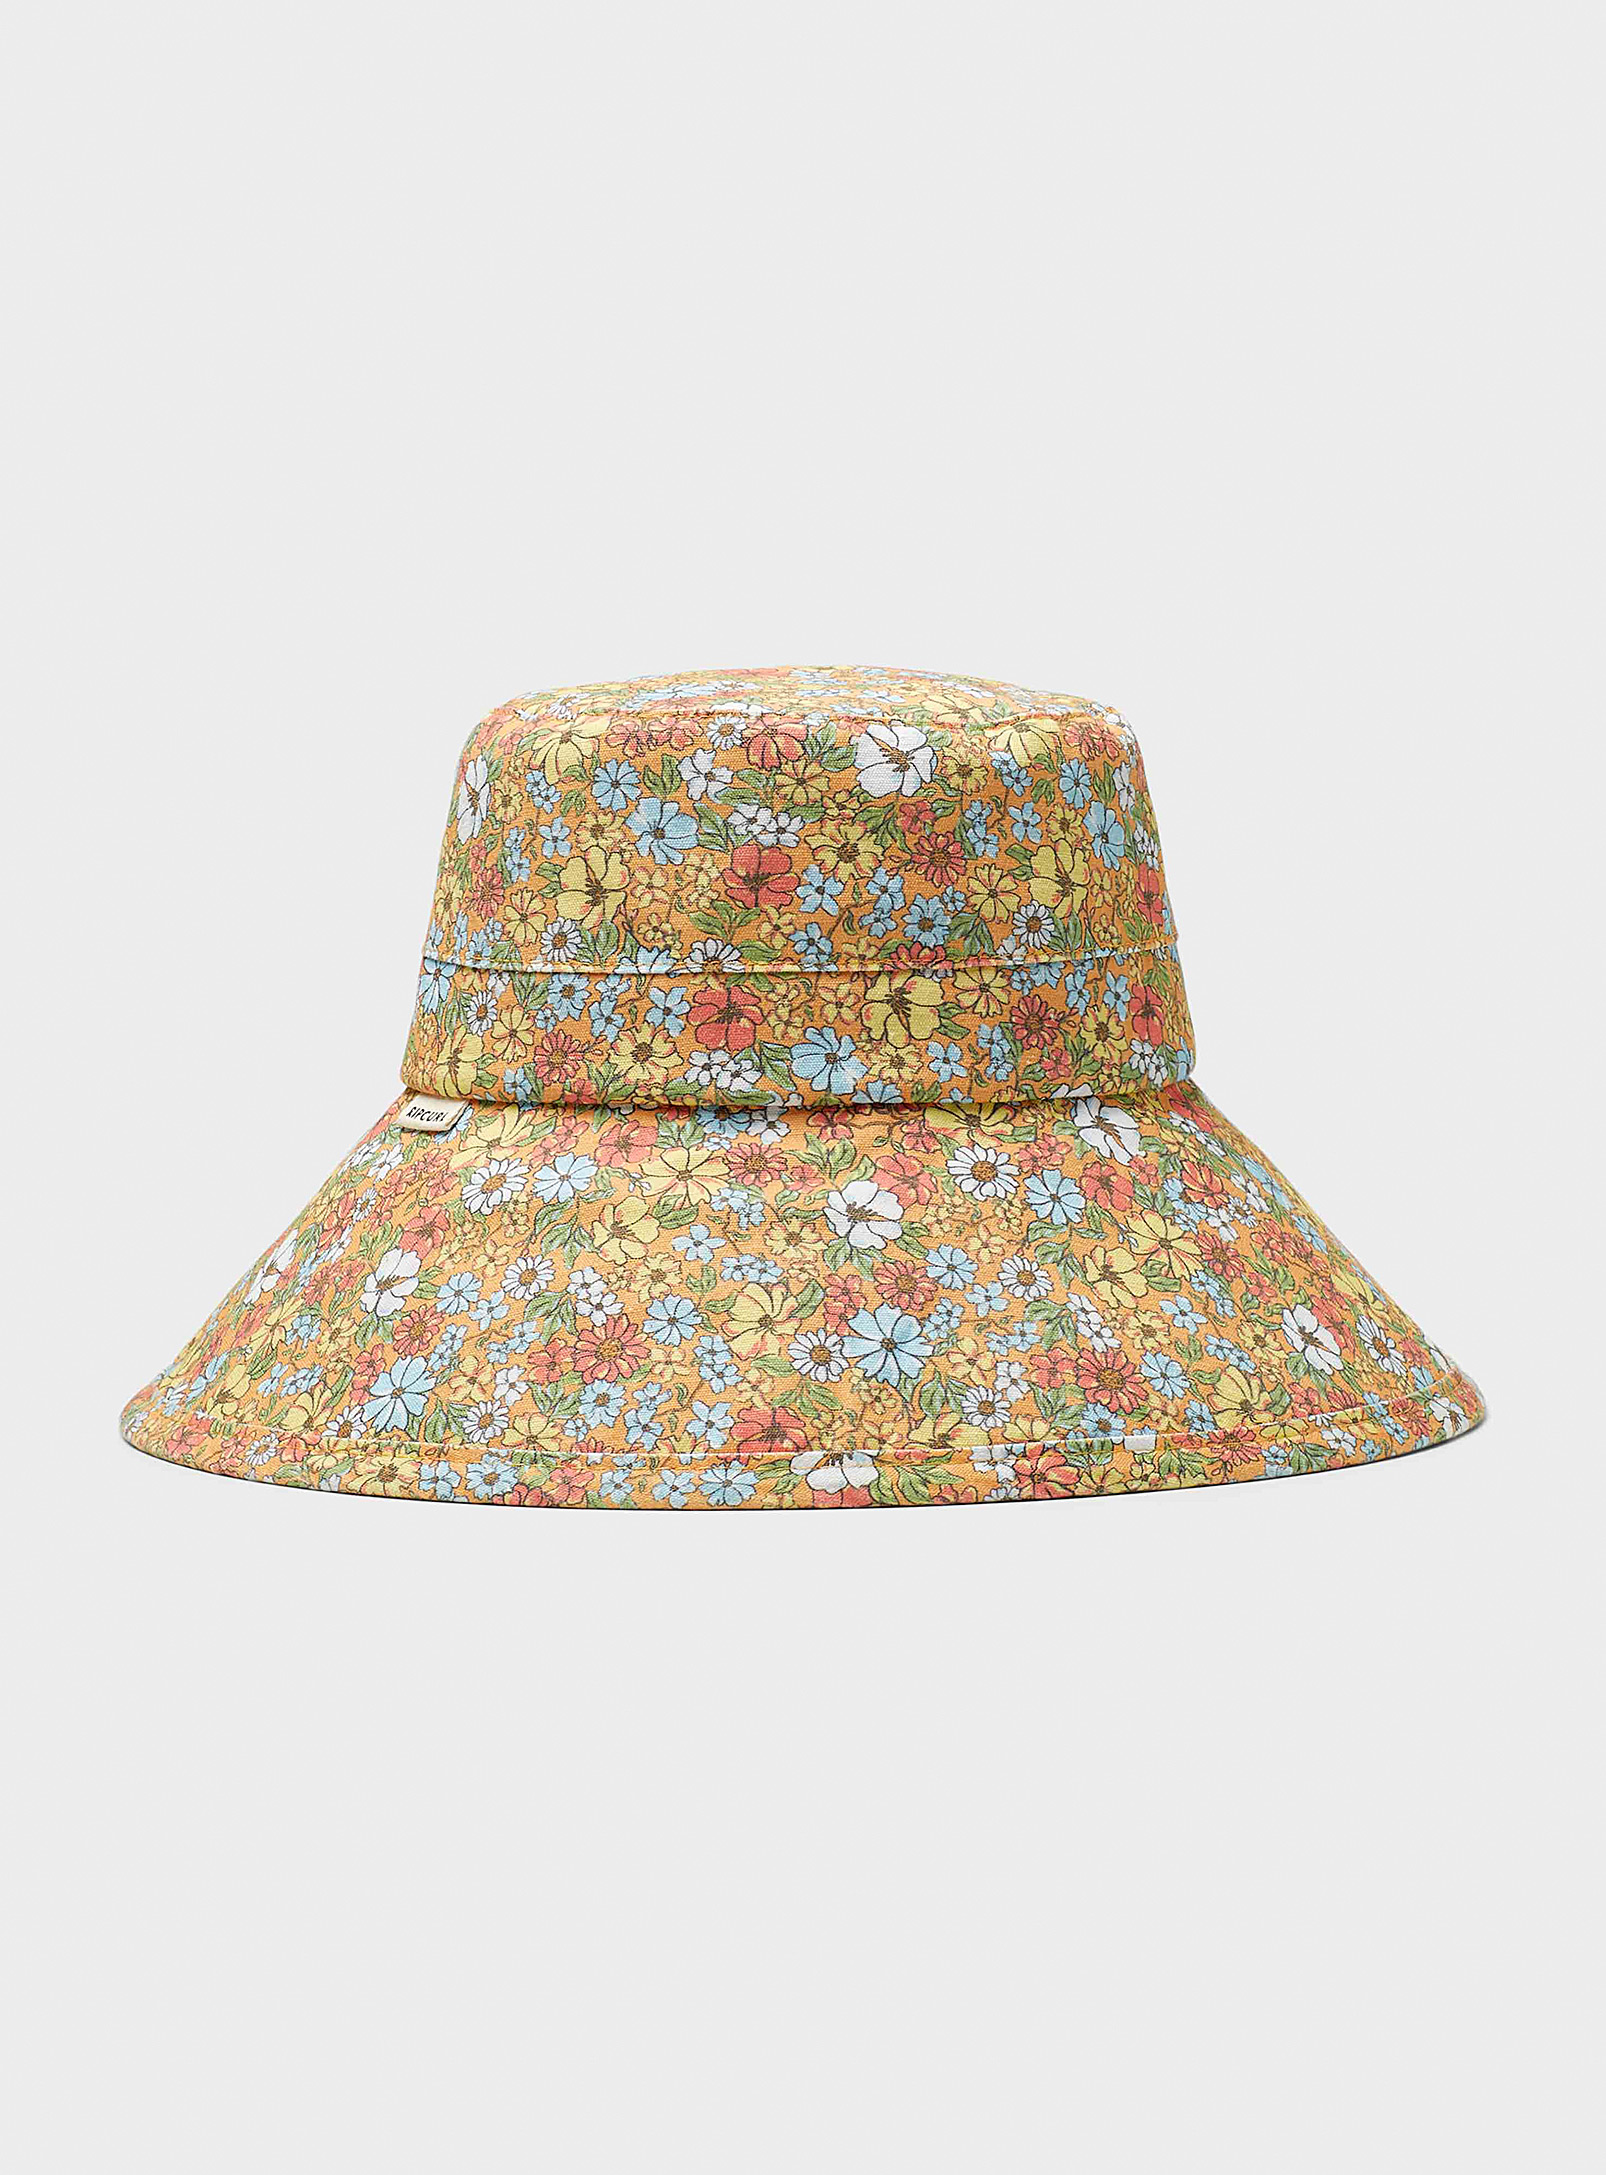 Rip Curl Large Pastel Jacquard Bucket Hat In Patterned Yellow